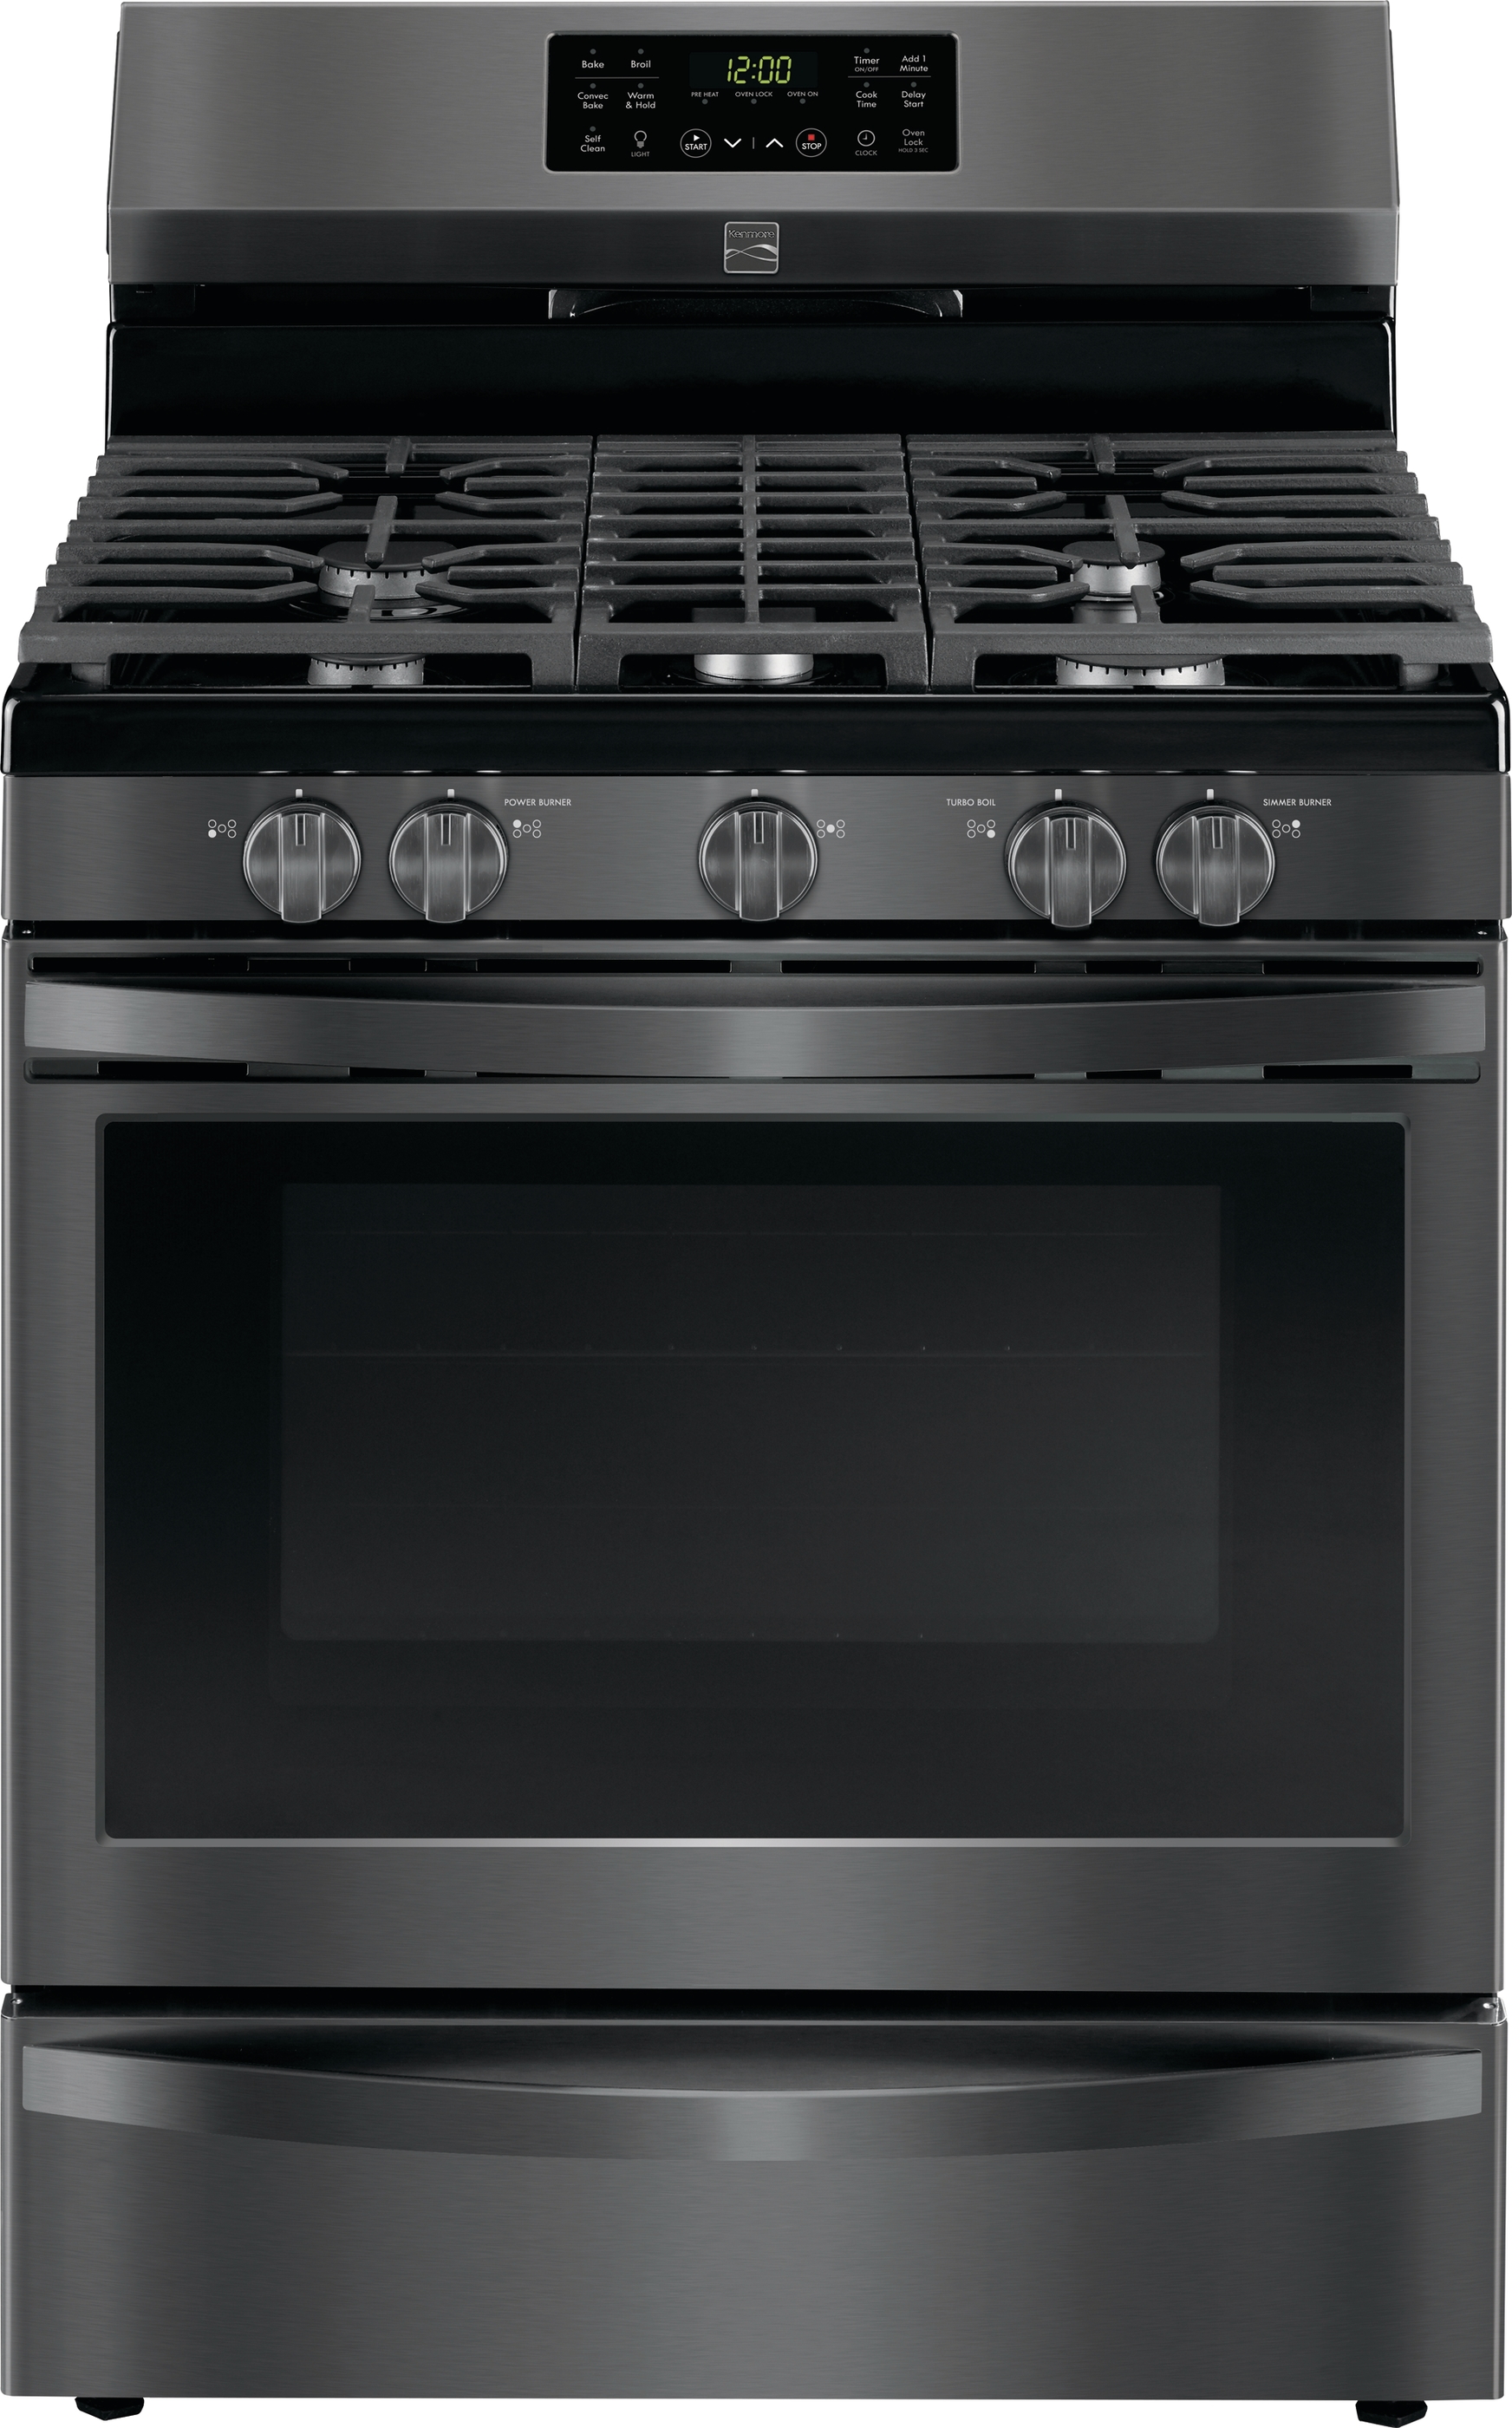 kenmore-74457-5-cu-ft-gas-range-with-convection-black-stainless